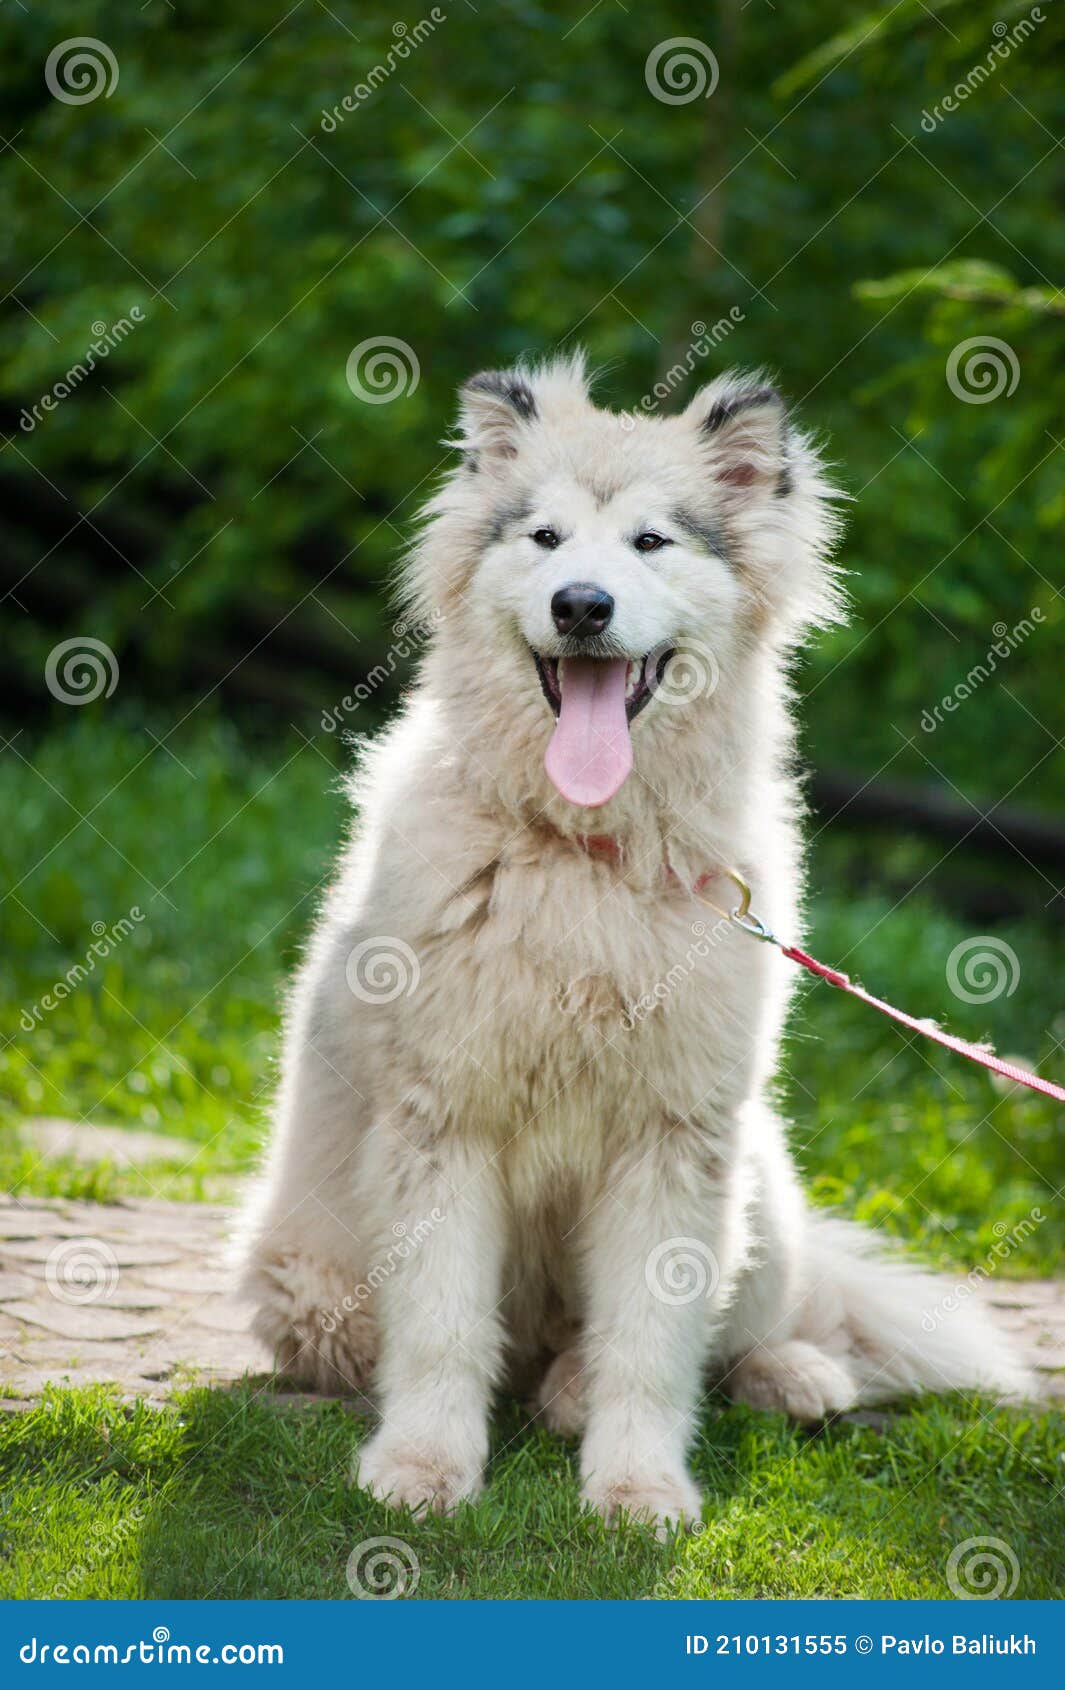 Young Alaskan Malamute Breed Puppy on a Grass Stock Image - Image of cute,  outdoors: 210131555